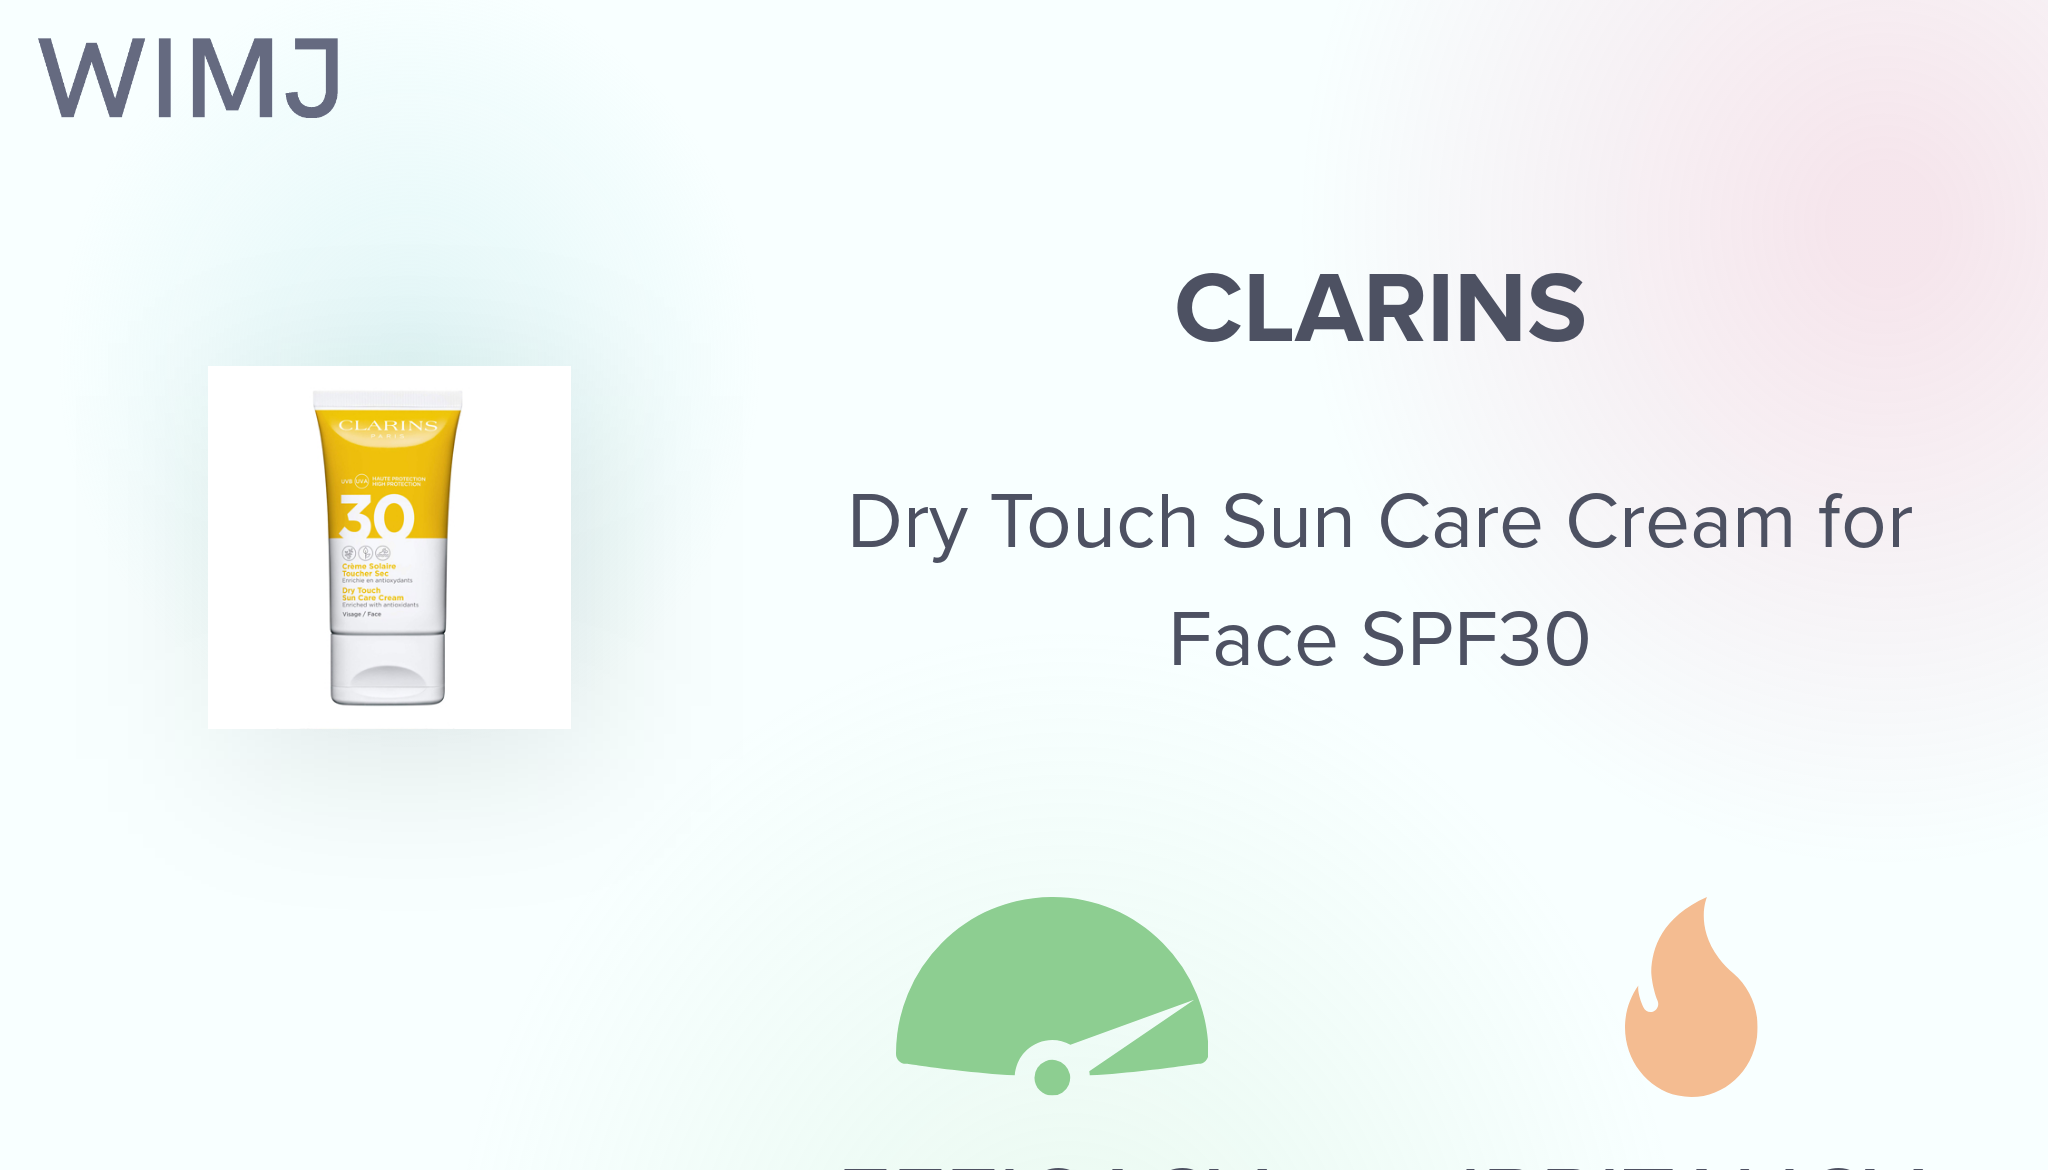 Review: Clarins - Dry Touch Sun Care Cream for Face SPF30 - WIMJ